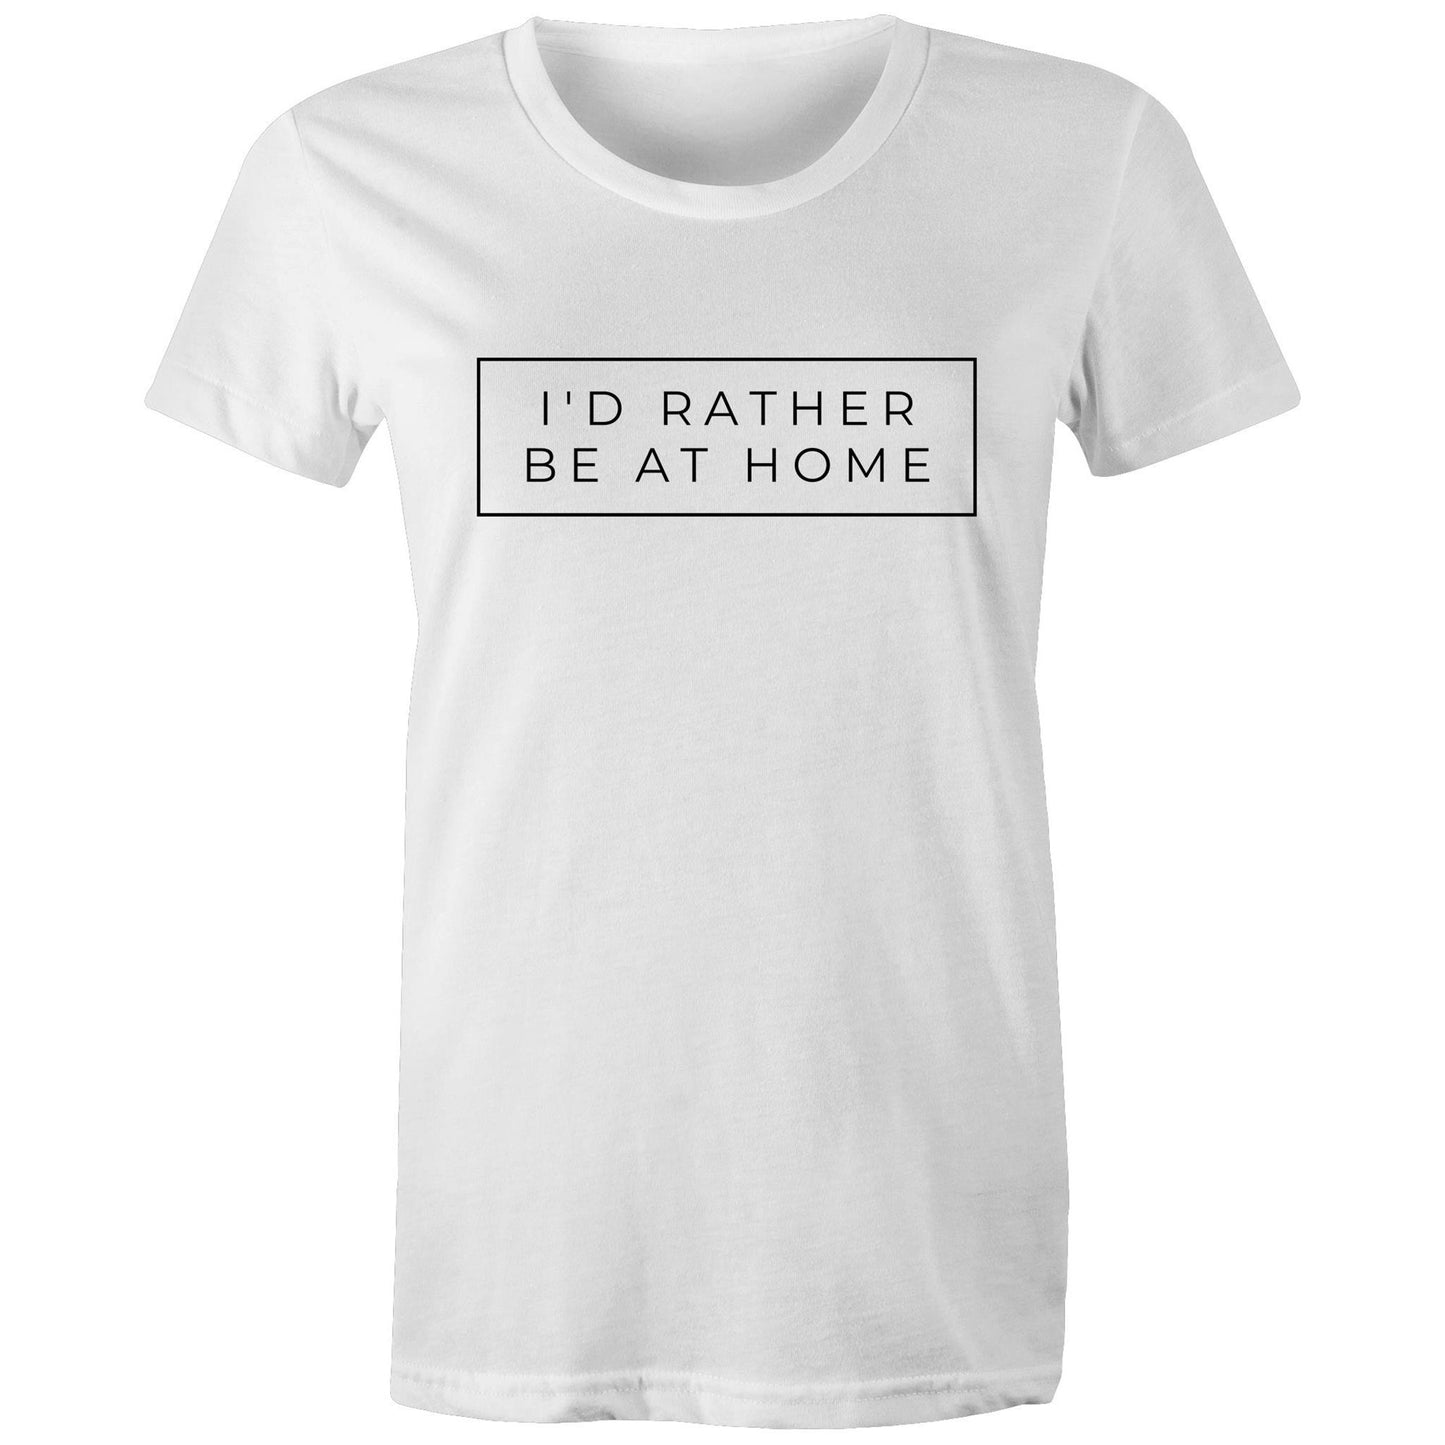 I'd Rather Be At Home - Womens T-shirt White Womens T-shirt home